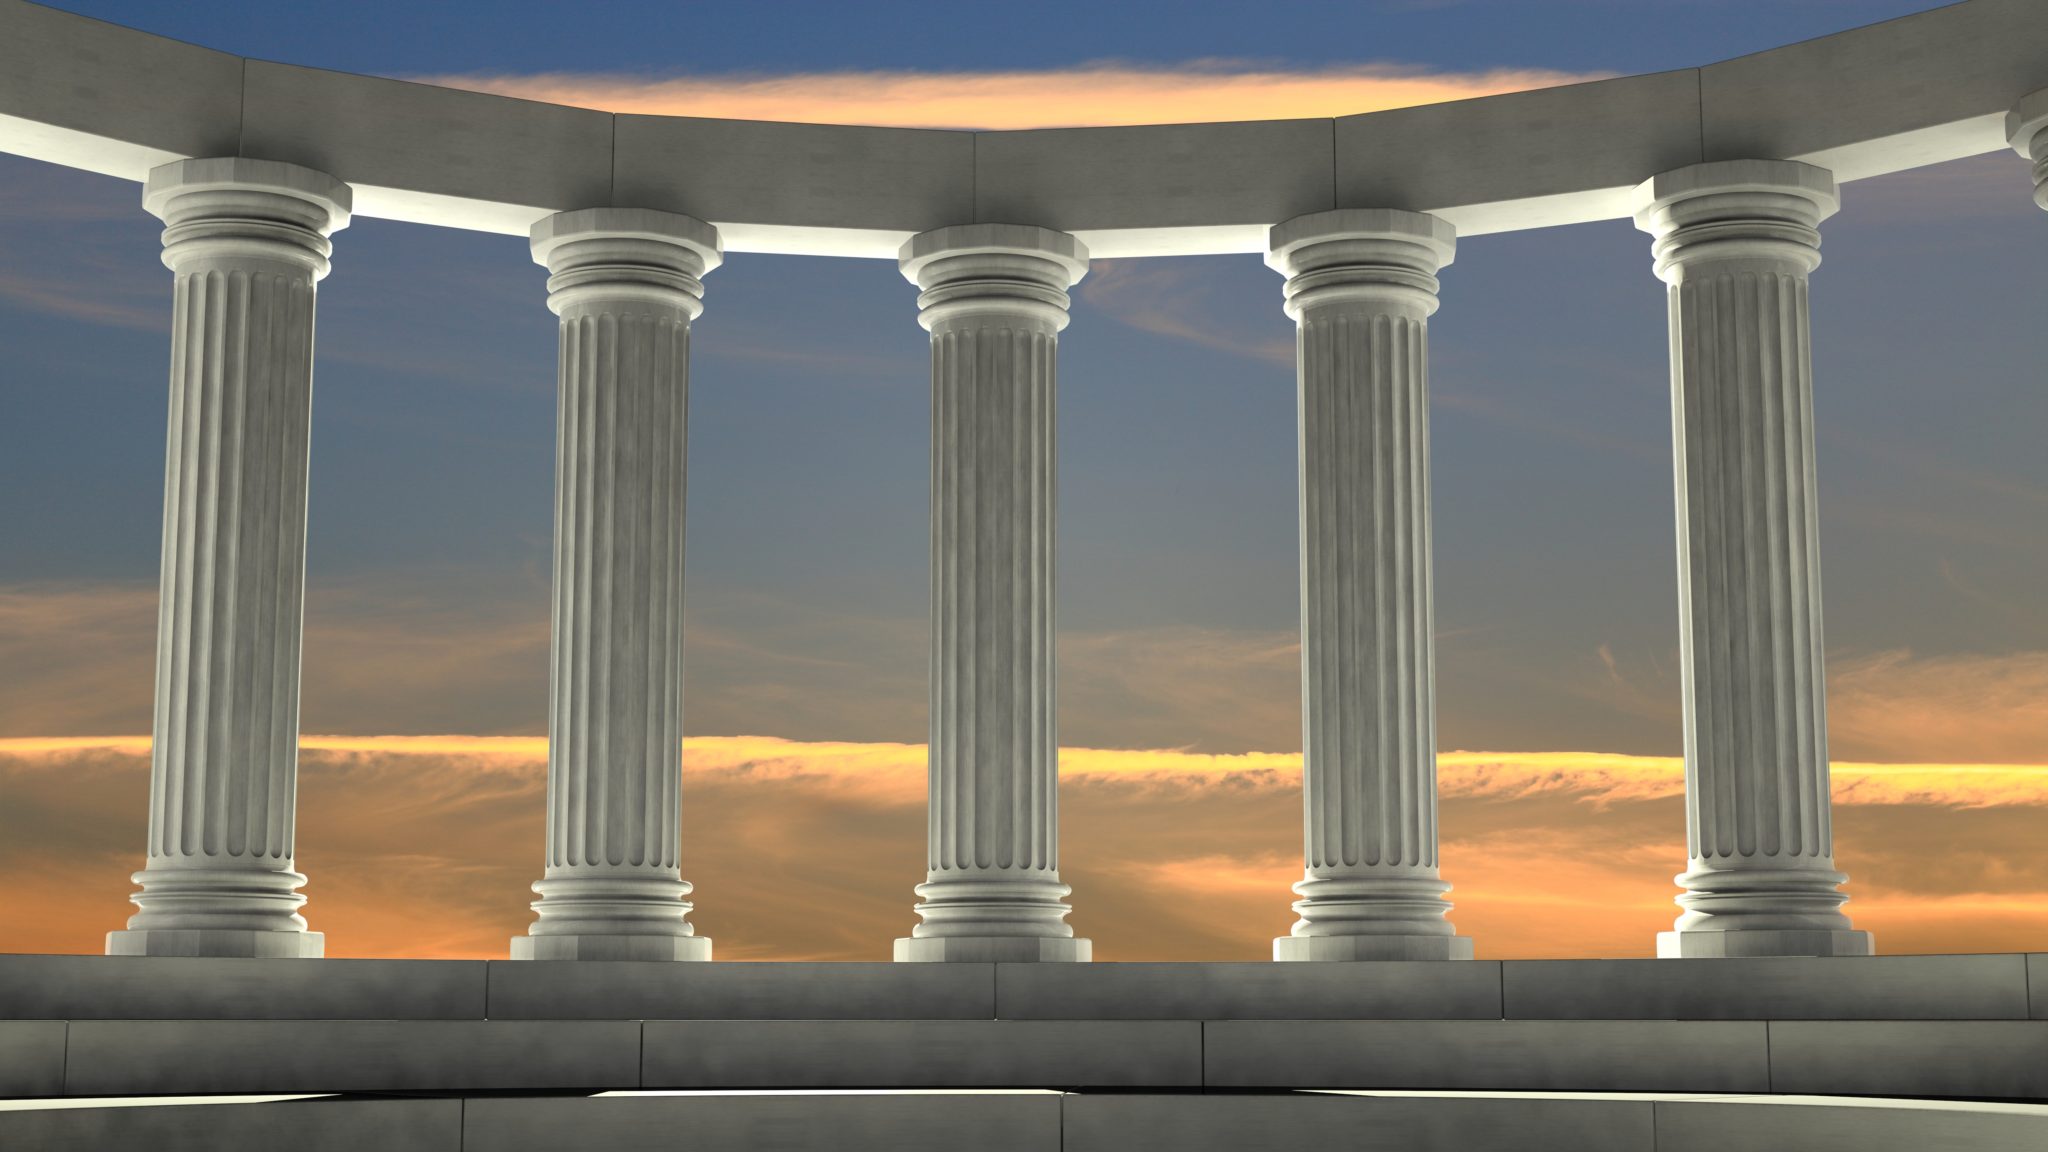 What Are The 4 Pillars Of The Earth